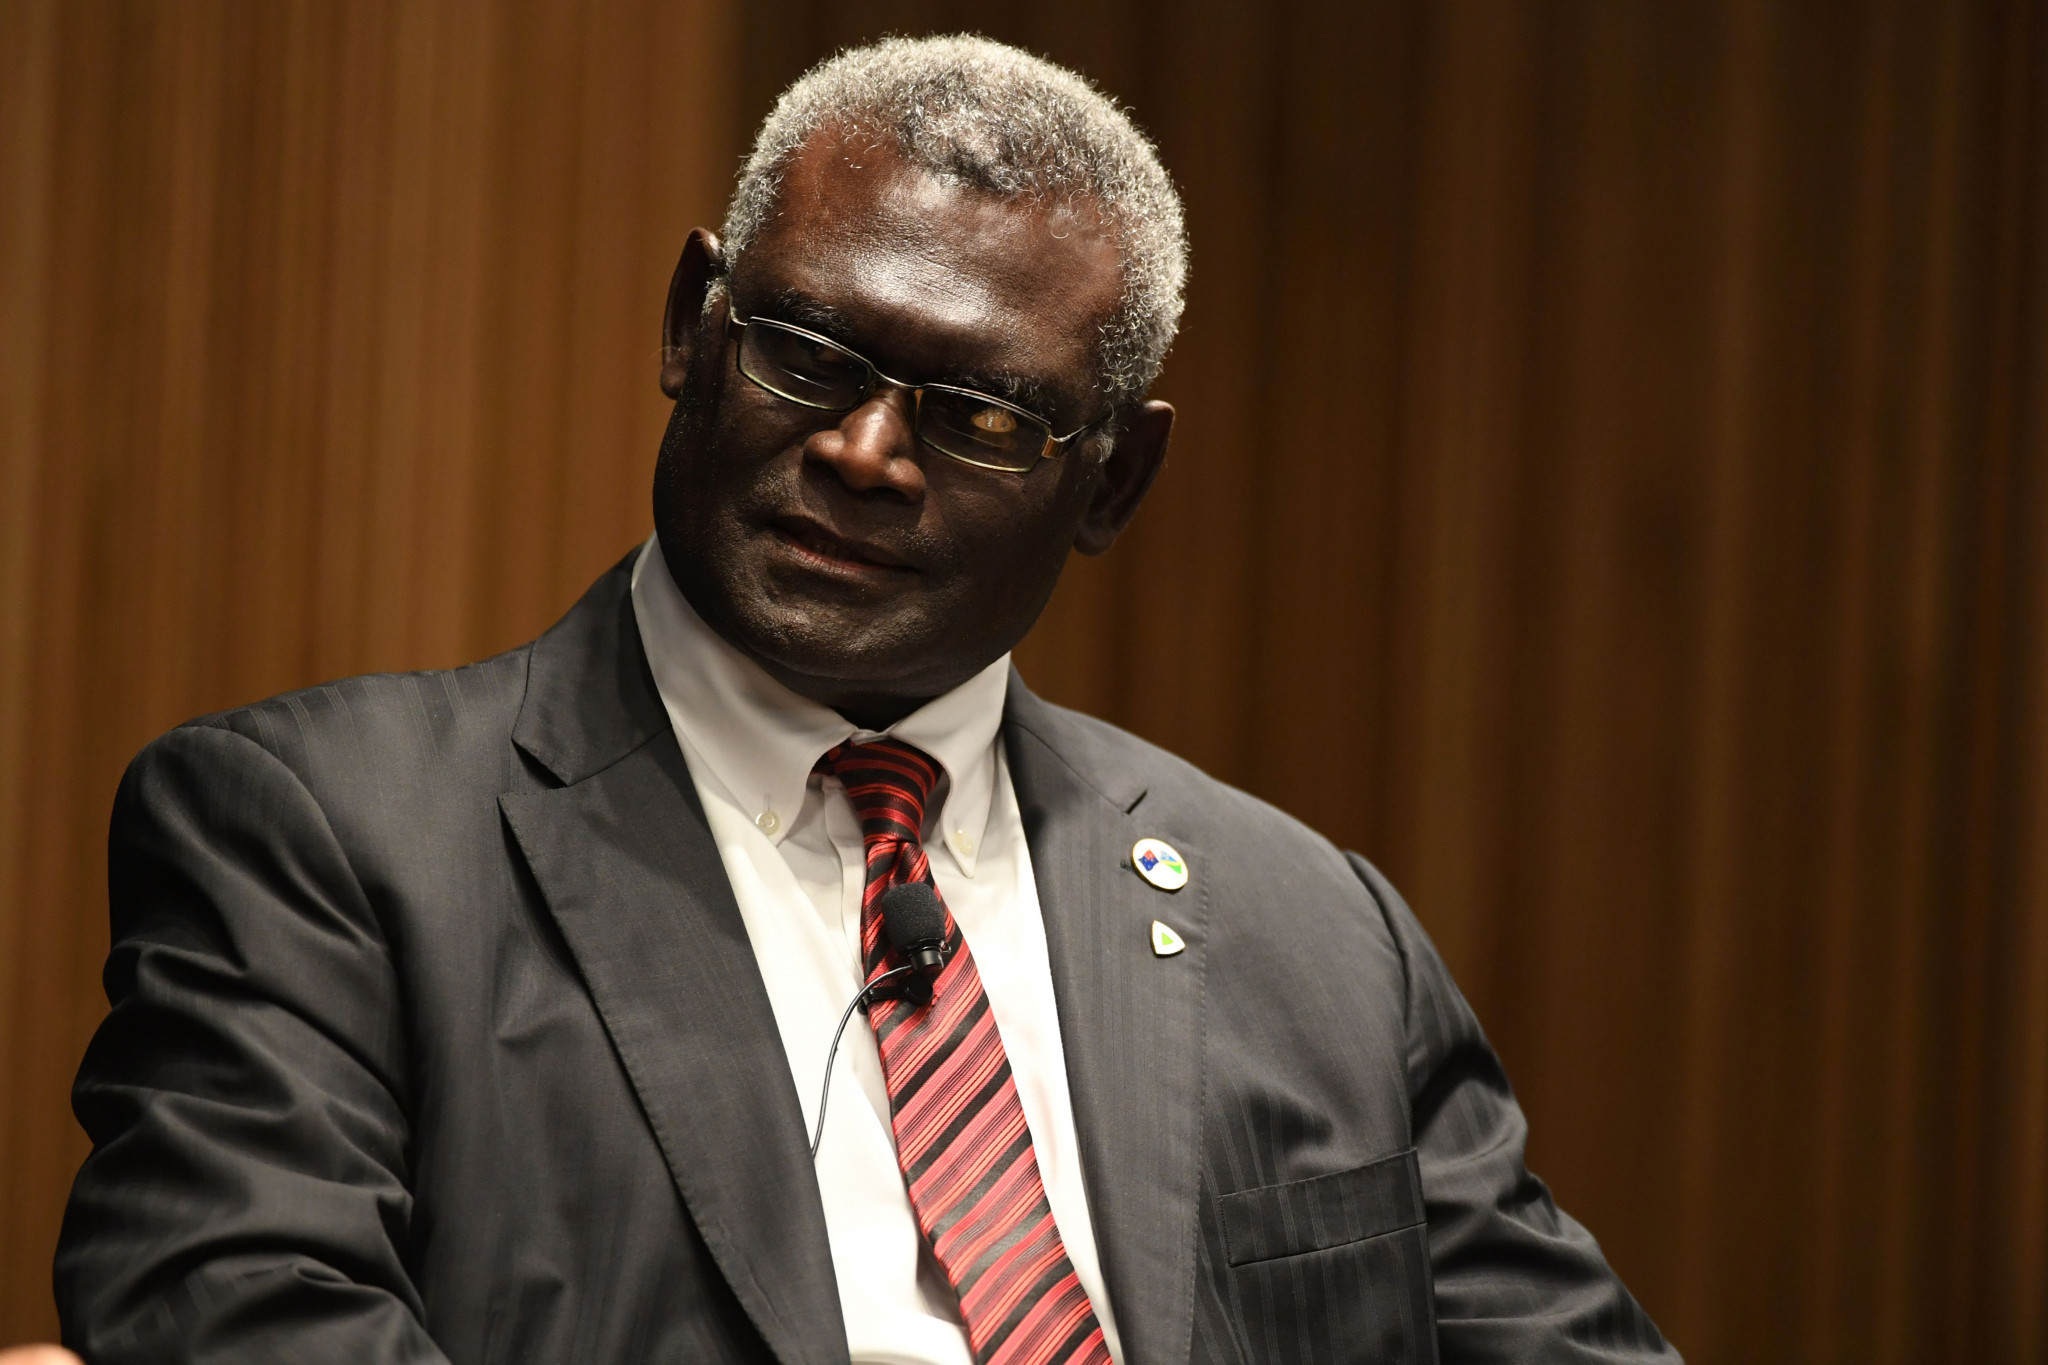 Manasseh Sogavare announced last month that the Safe and Green Games would take place in February ©Getty Images